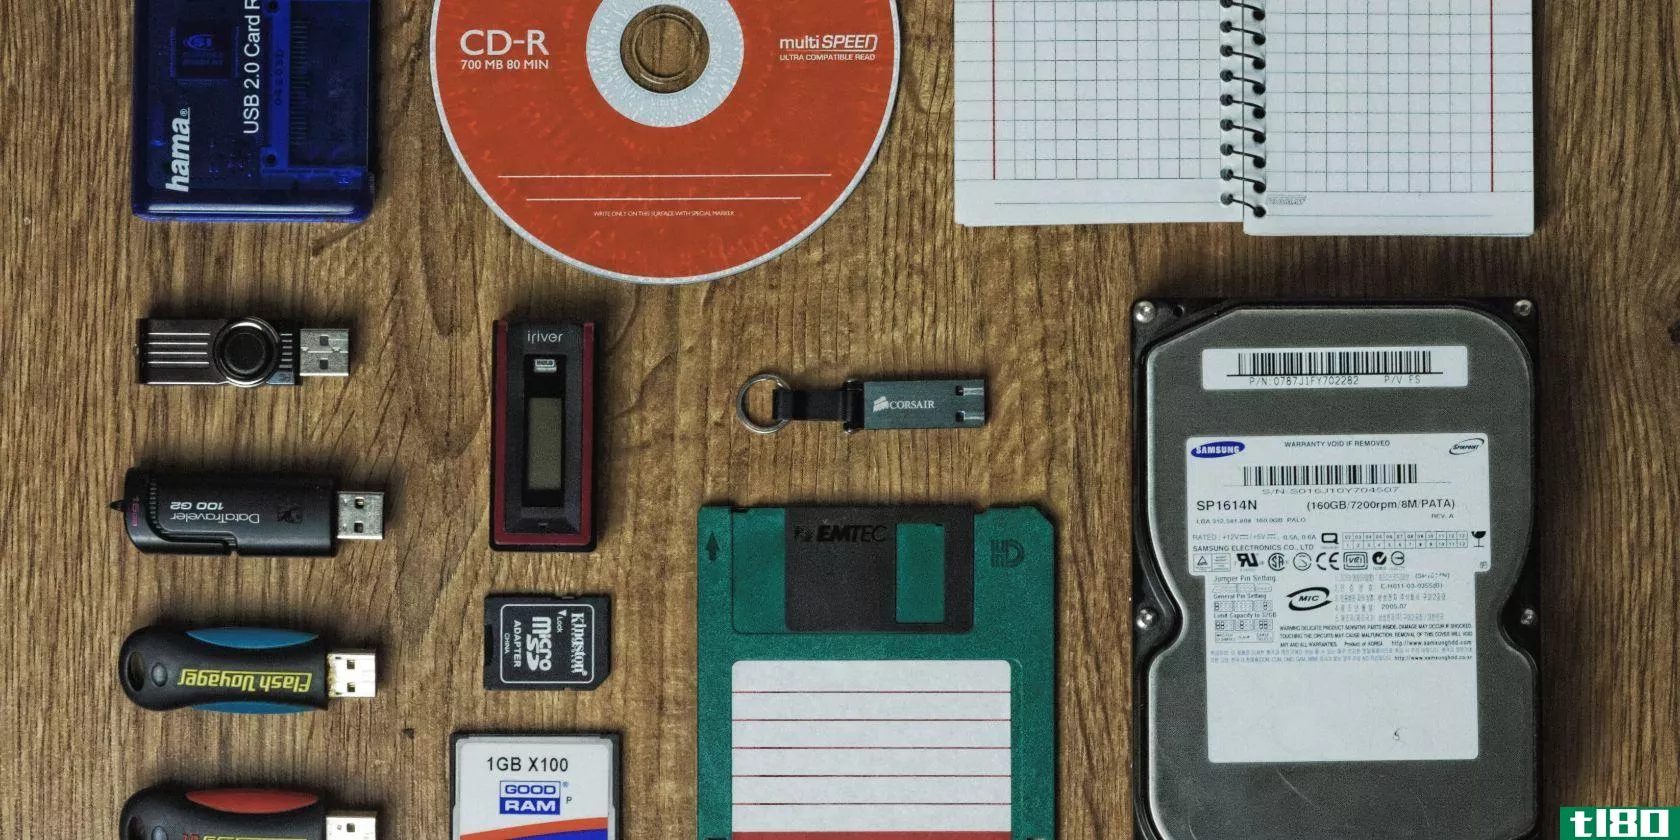 CD, hard drive, flash drive, and floppy disk on a wooden surface